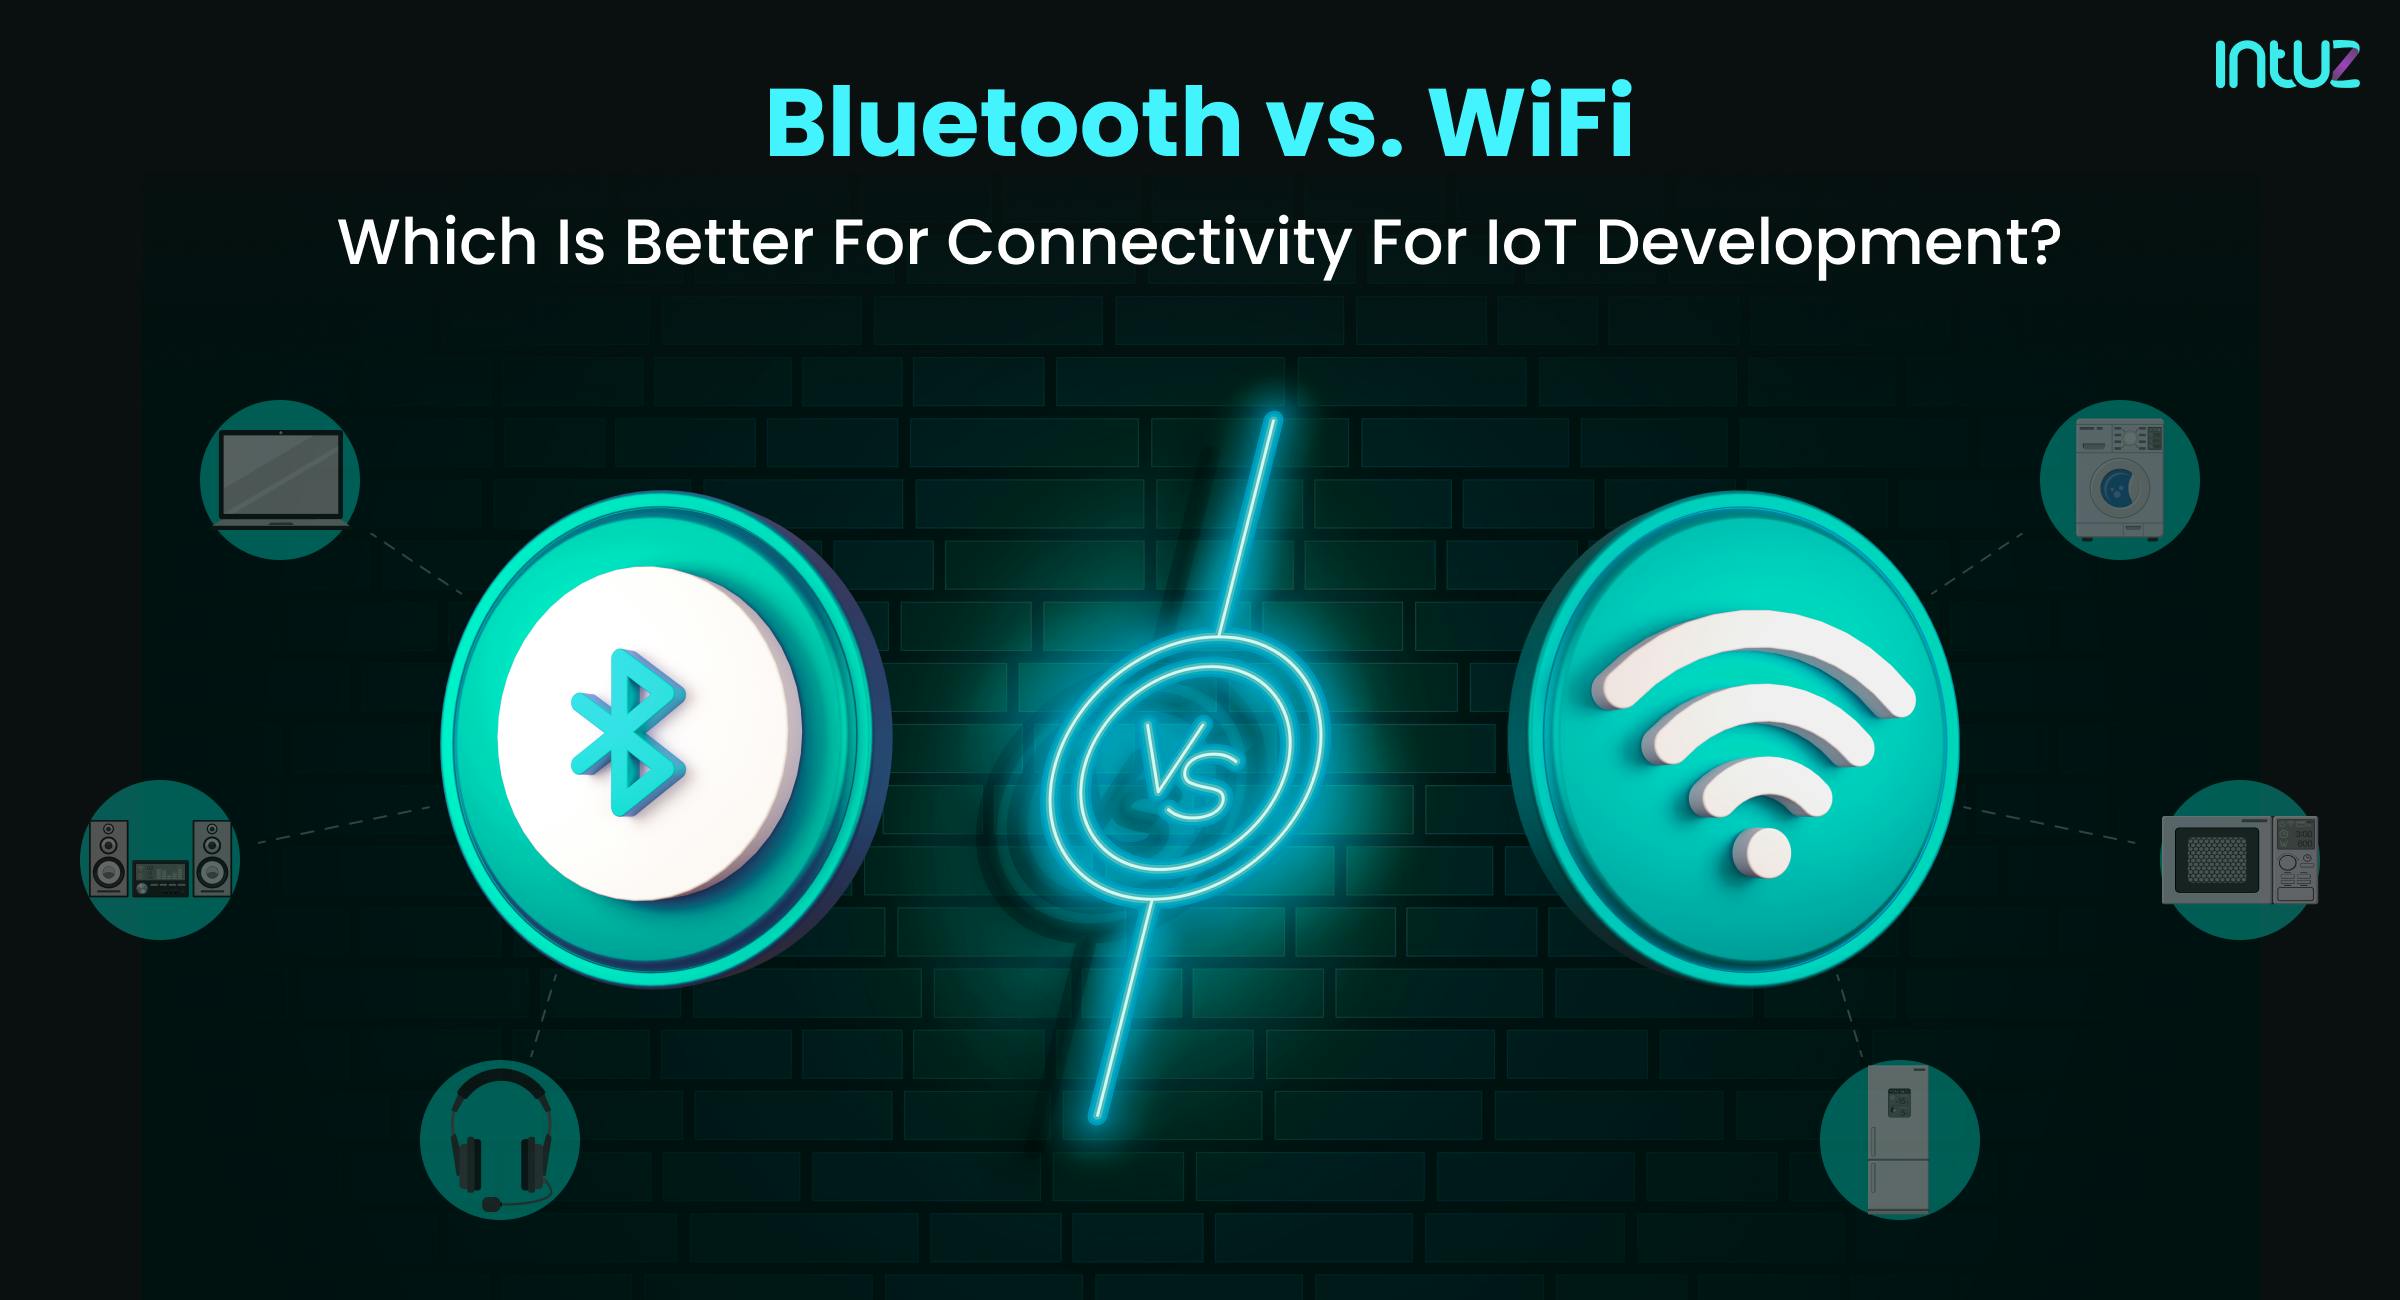 https://images.prismic.io/intuzwebsite/8d7a3381-86e1-4ddf-8851-f0836ce5e3bf_Bluetooth+vs.+WiFi+Which+Is+Better+For+Connectivity+For+IoT+Development_%402x.png?auto=compress,format